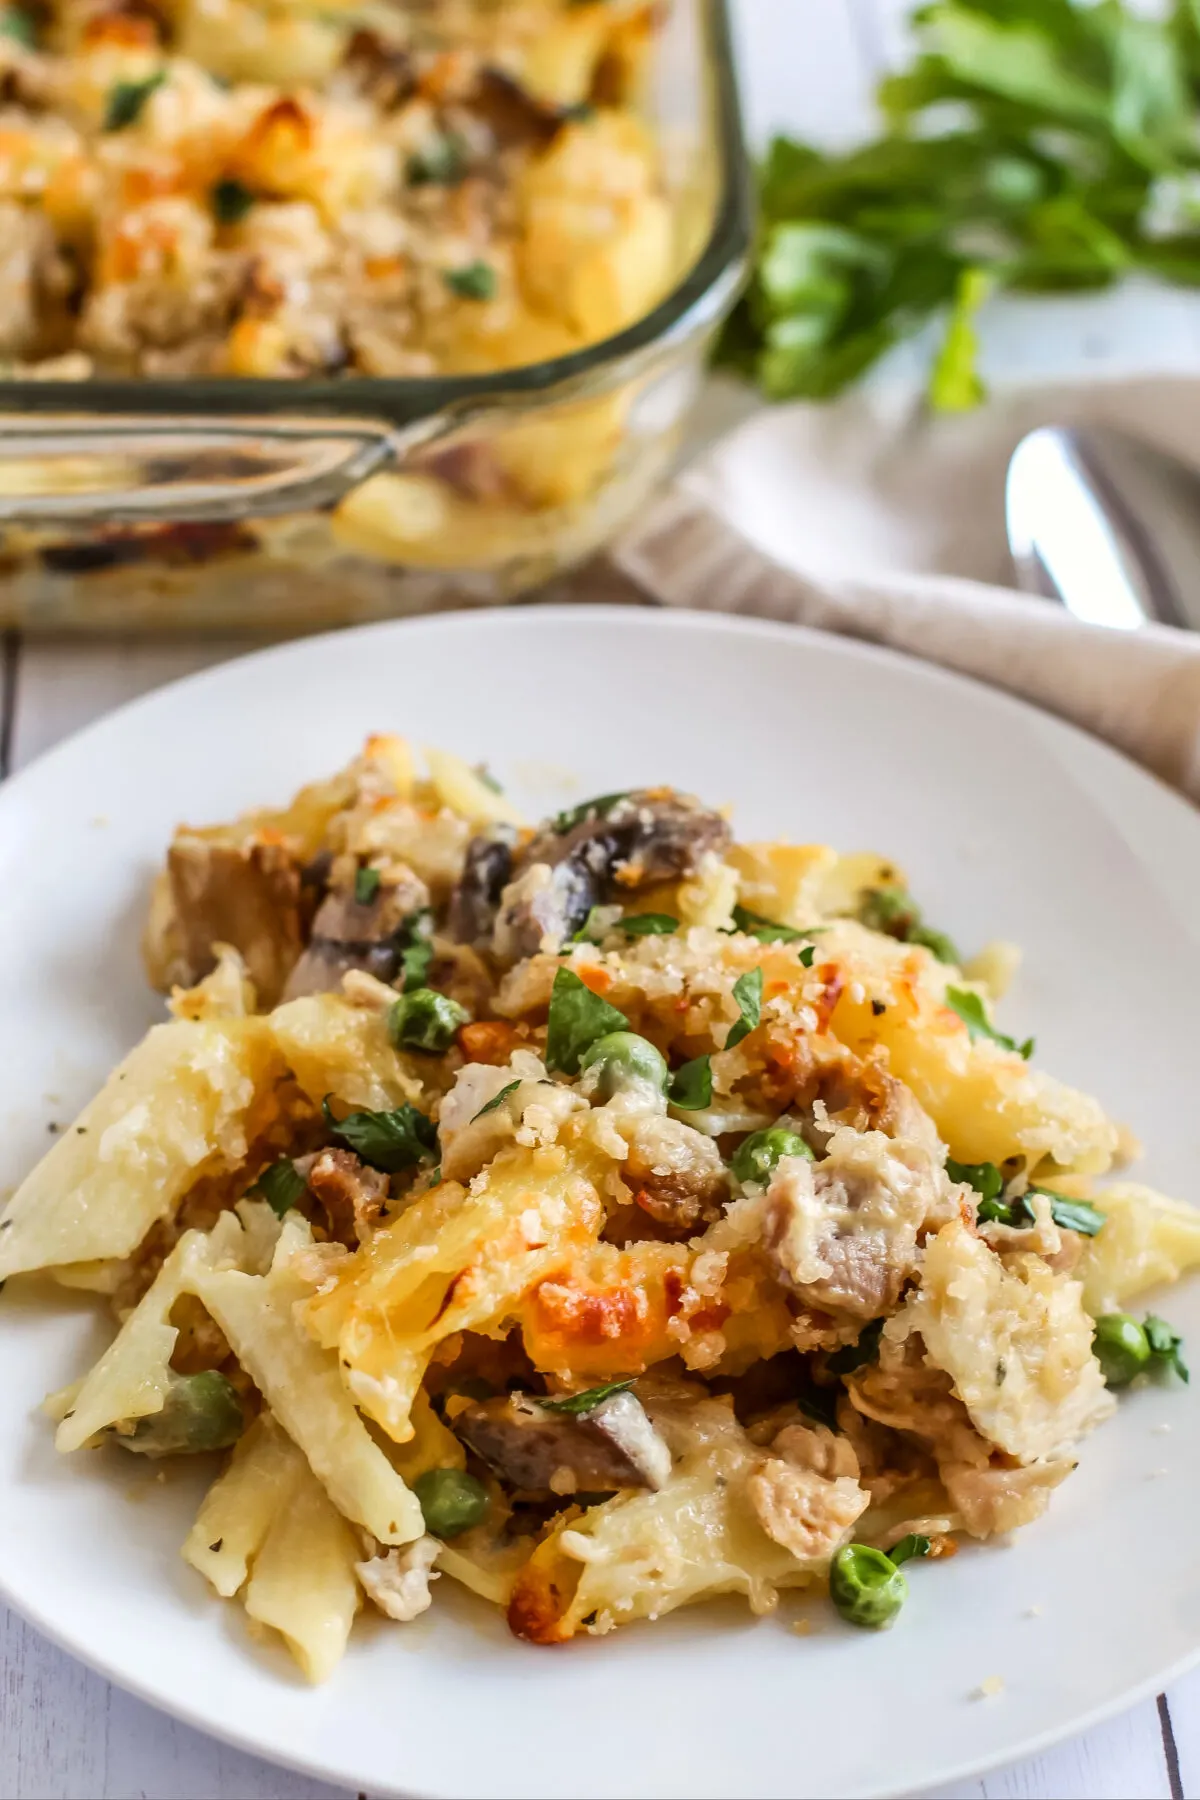 Looking for a new way to use up leftover turkey? This delicious creamy leftover turkey casserole recipe will satisfy your whole family!